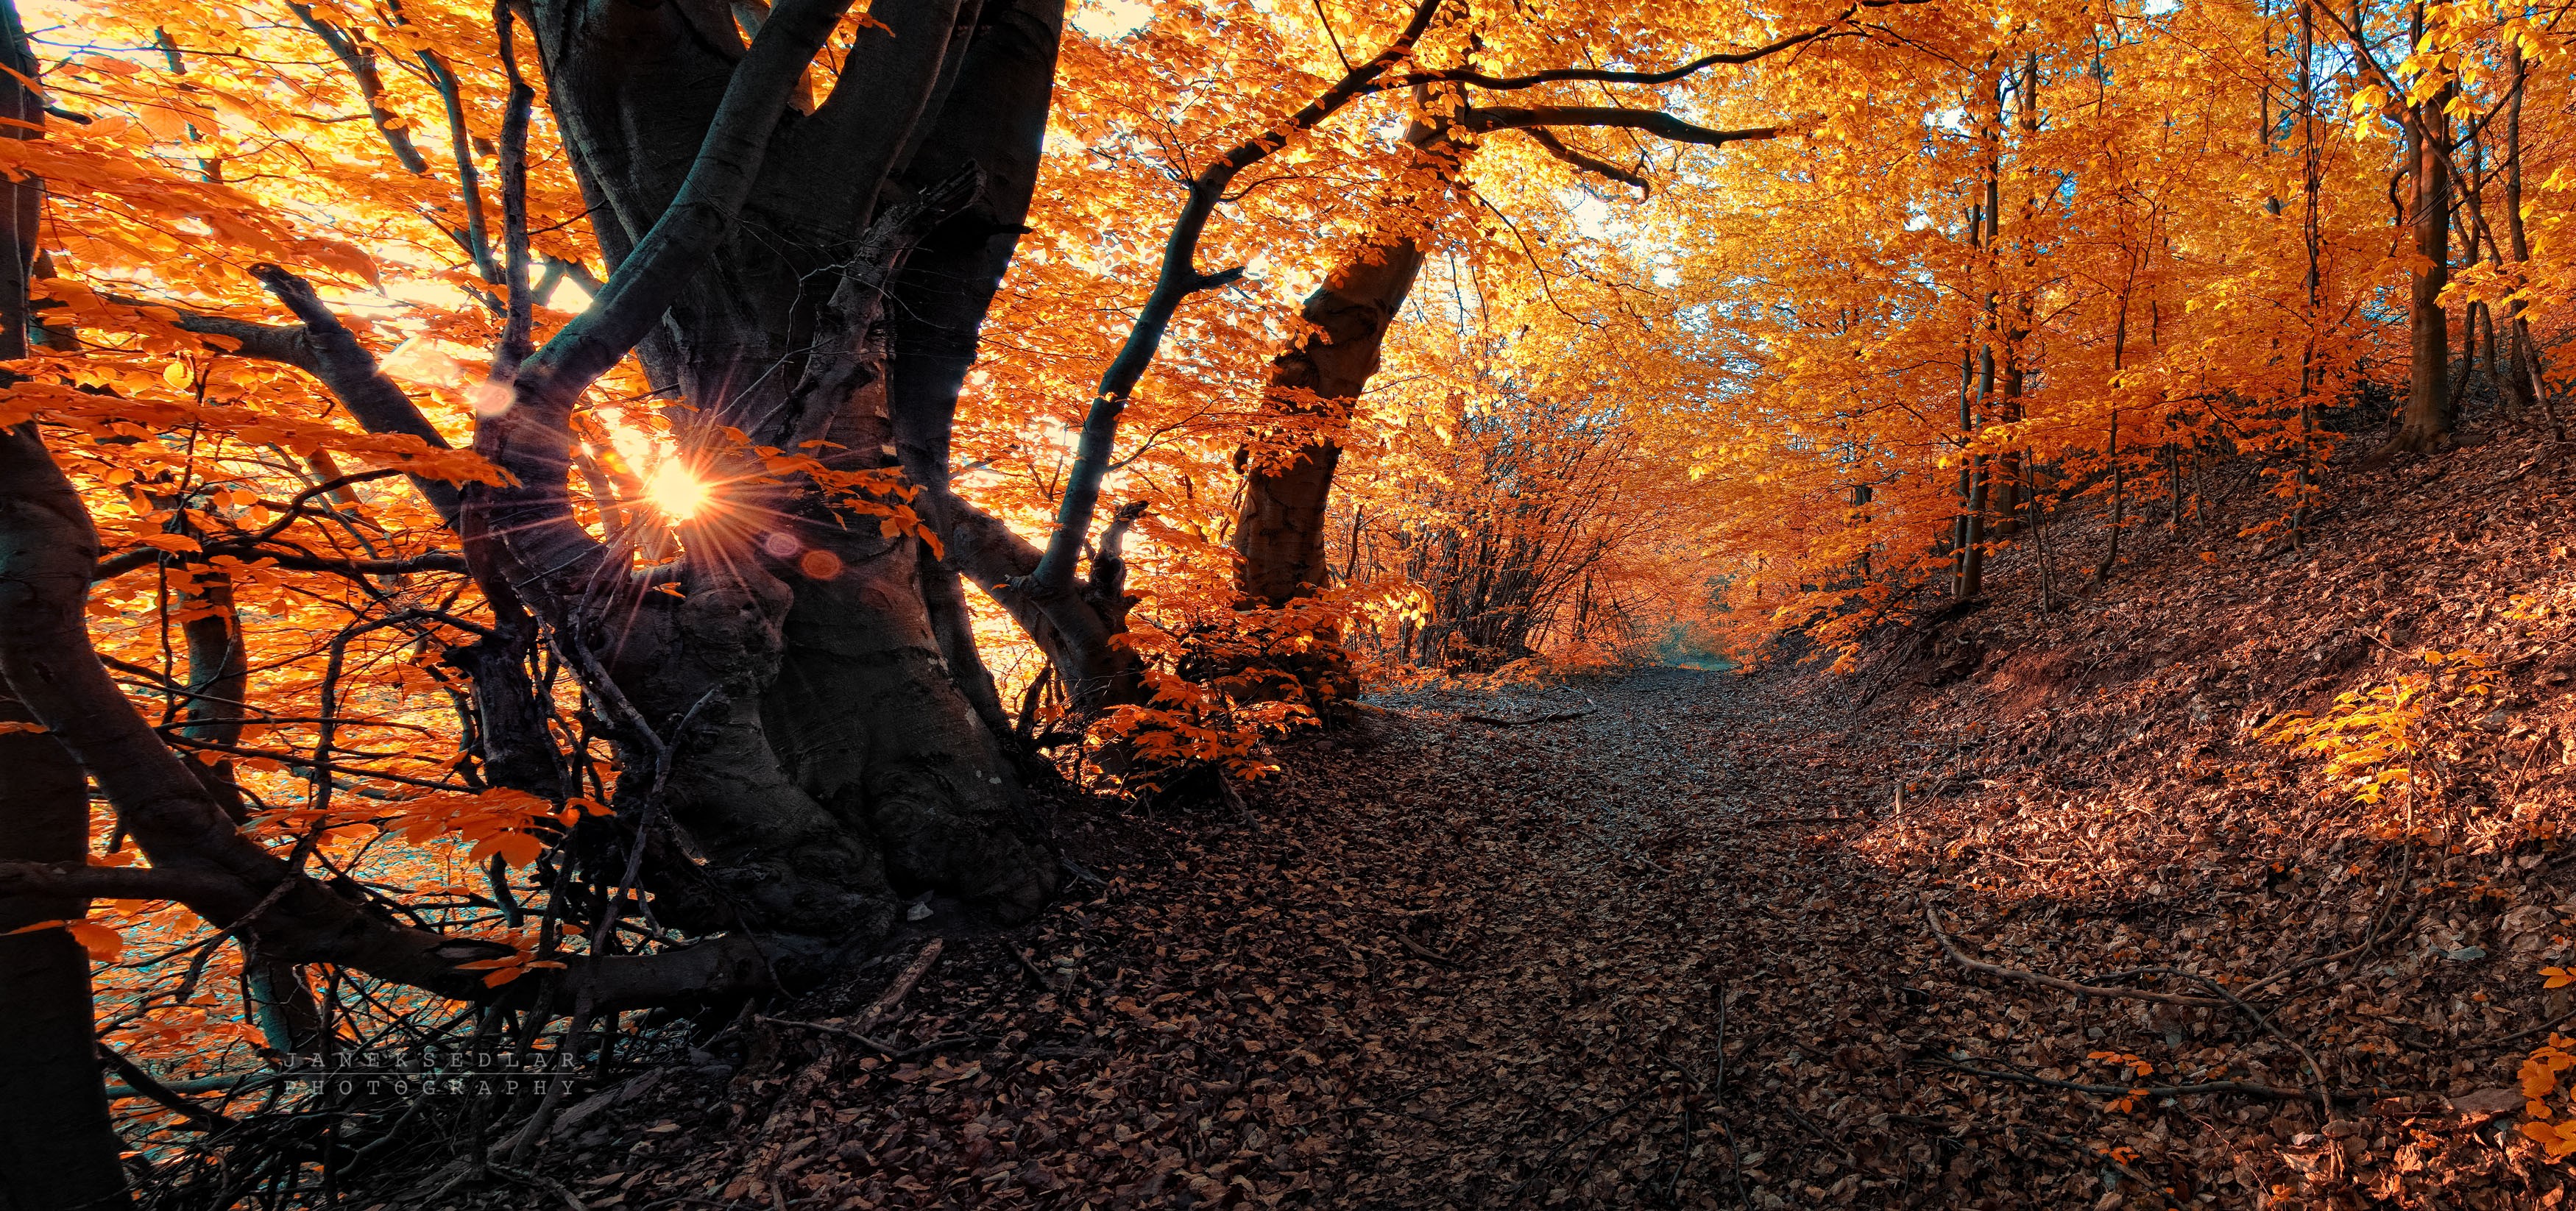 General 3500x1646 fall nature path red leaves forest plants sunlight outdoors